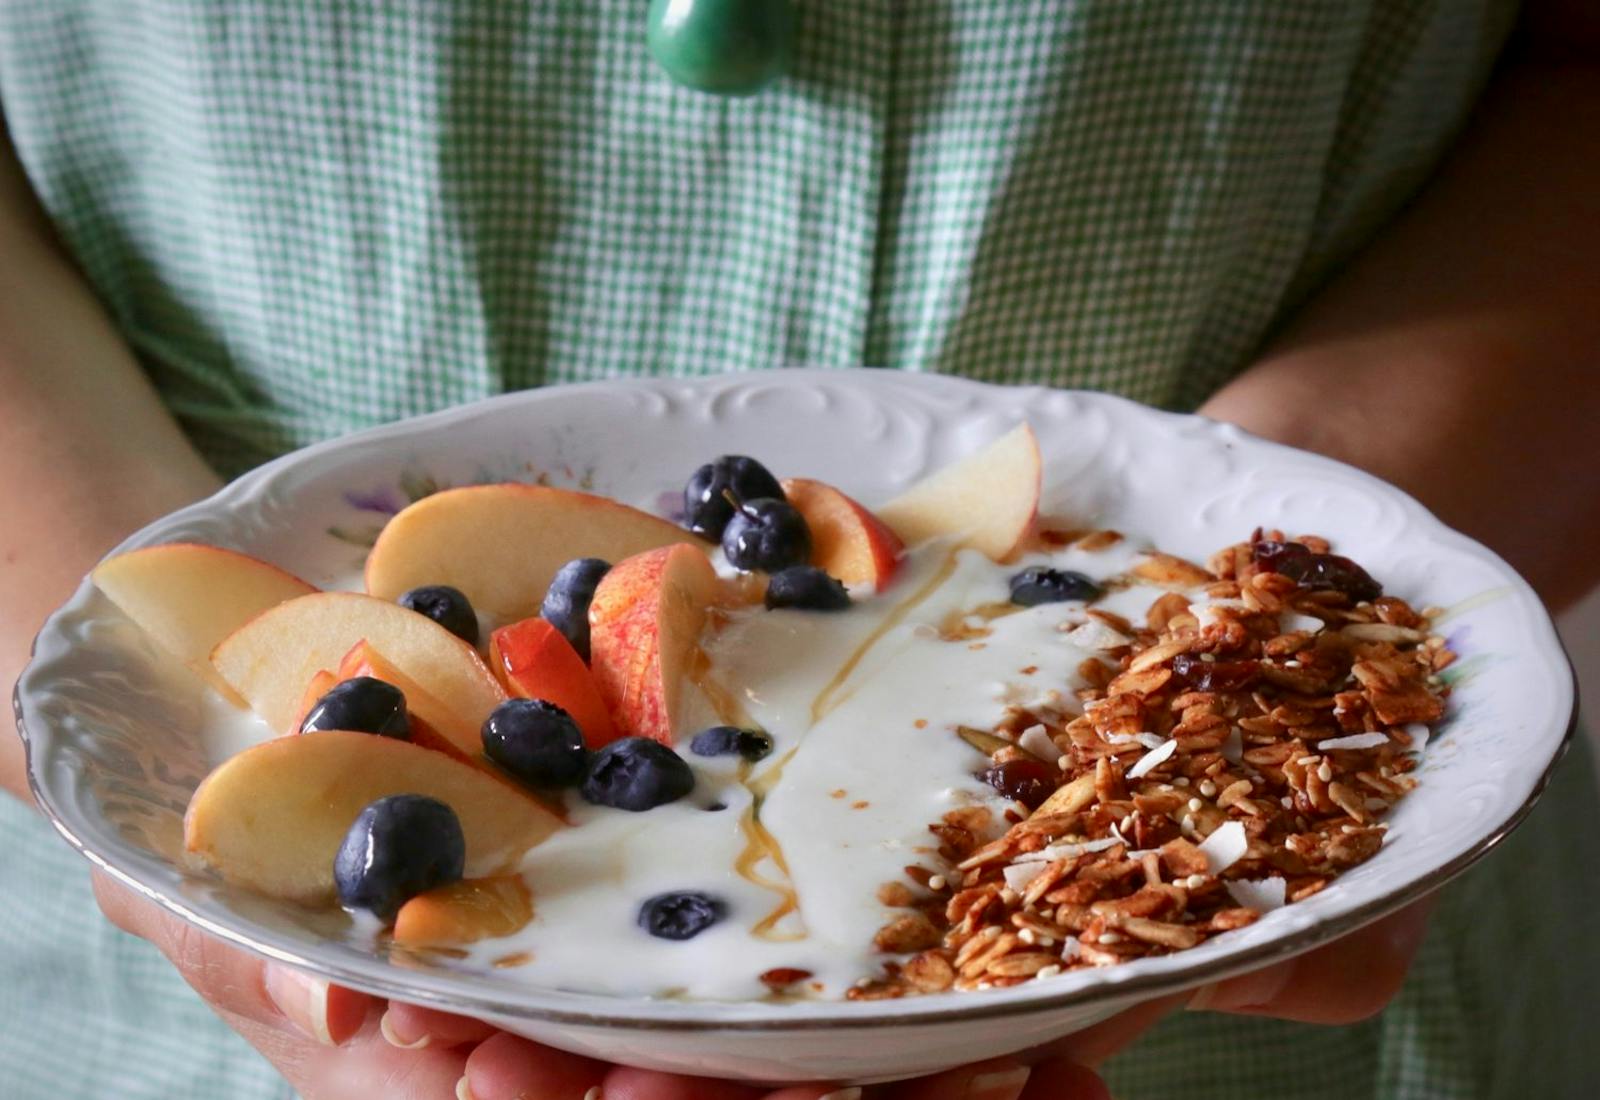 Person holding bowl of granola with tahini and silan along with fresh fruit and yogurt.